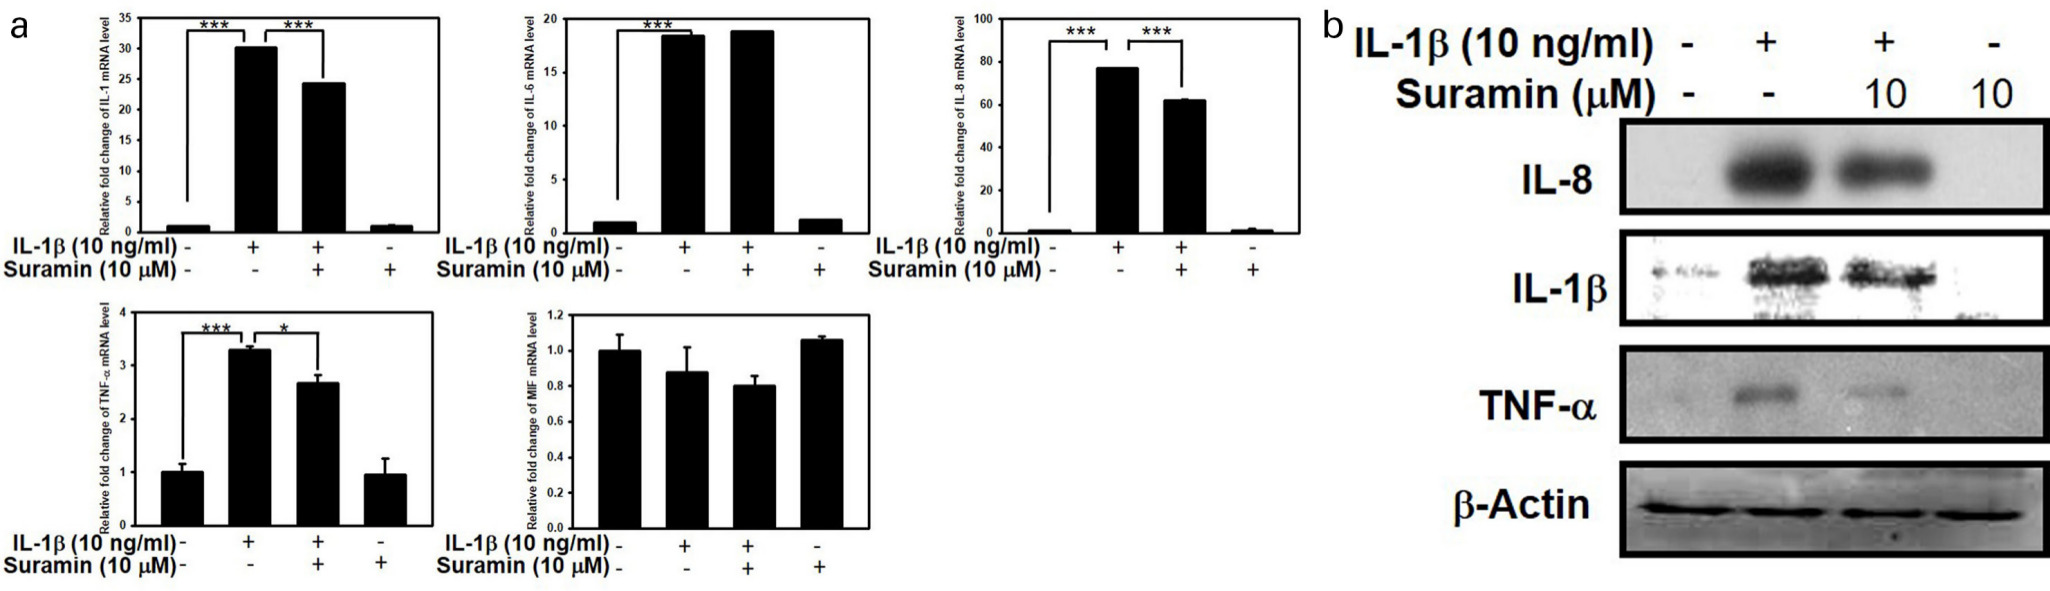 Fig. 9 
          Effect of suramin on interleukin (IL)-1β-induced proinflammmatory cytokines production. a) The nucleus pulposus (NP) cells were treated with or without 10 ng/ml IL-1β for 24 hours, following pretreatment with vehicle or suramin for 10 μM suramin for 24 hours. Total RNA were extracted for real-time PCR analysis of IL-1β, IL-6, IL-8, tumour necrosis factor alpha (TNF-α), and macrophage migration inhibitory-1 (MIF) messenger RNA (mRNA) expression. b) NP cells were treated with 10 ng/ml IL-1β for 24 hours, following pretreatment with vehicle or 10 μM suramin for one hour. The cell lysates are collected for western blot to measure the IL-1, IL-8, and TNF-α, respectively. The expression of glyceraldehyde 3-phosphate dehydrogenase (gapdh) or β-actin was used as an internal control of real-time polymerase chain reaction or western blot, respectively. *p < 0.05, ***p < 0.001. All data are shown as the mean and standard deviation (n = 3 to 5) and were analyzed by independent-samples t-test.
        